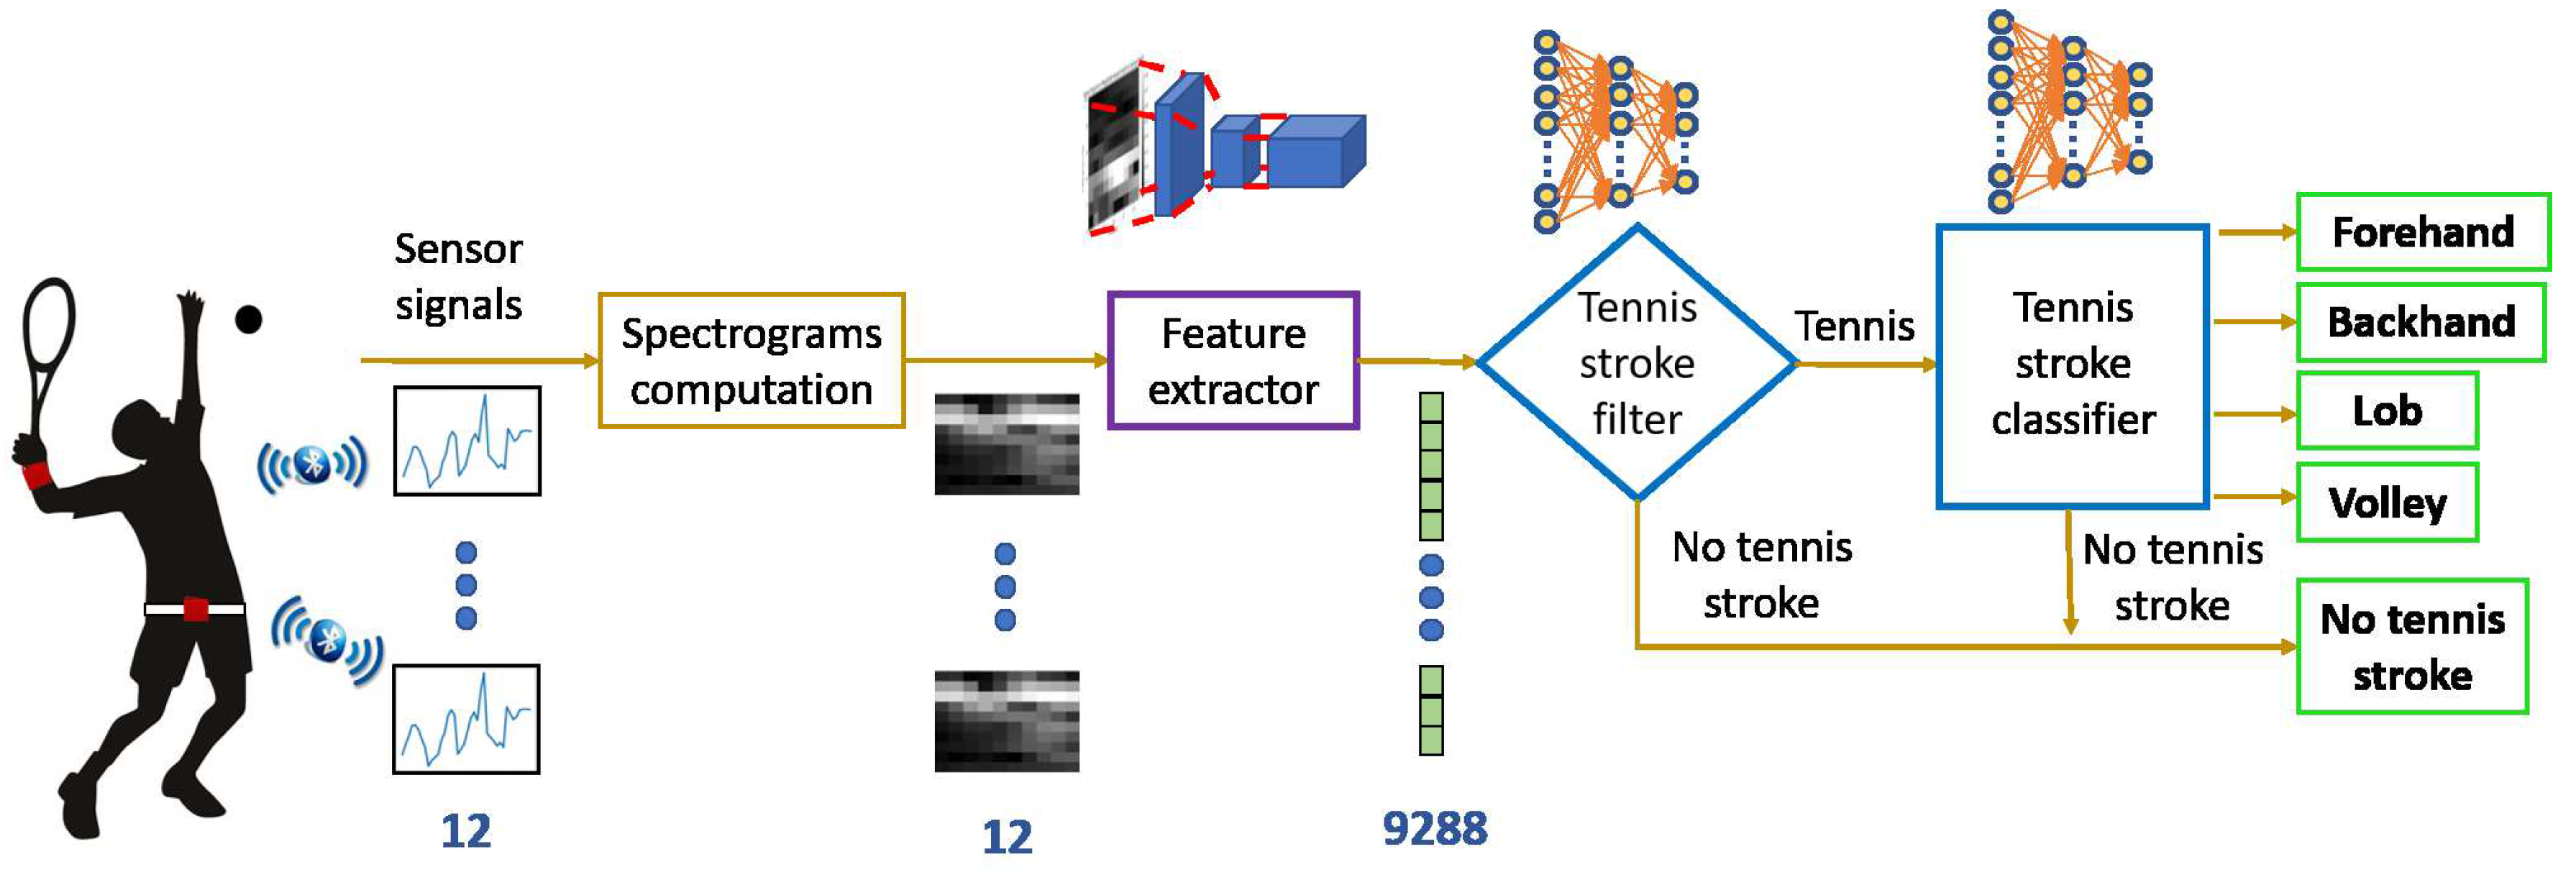 Sensors | Free Full-Text | Detection of Tennis Activities with Wearable  Sensors | HTML